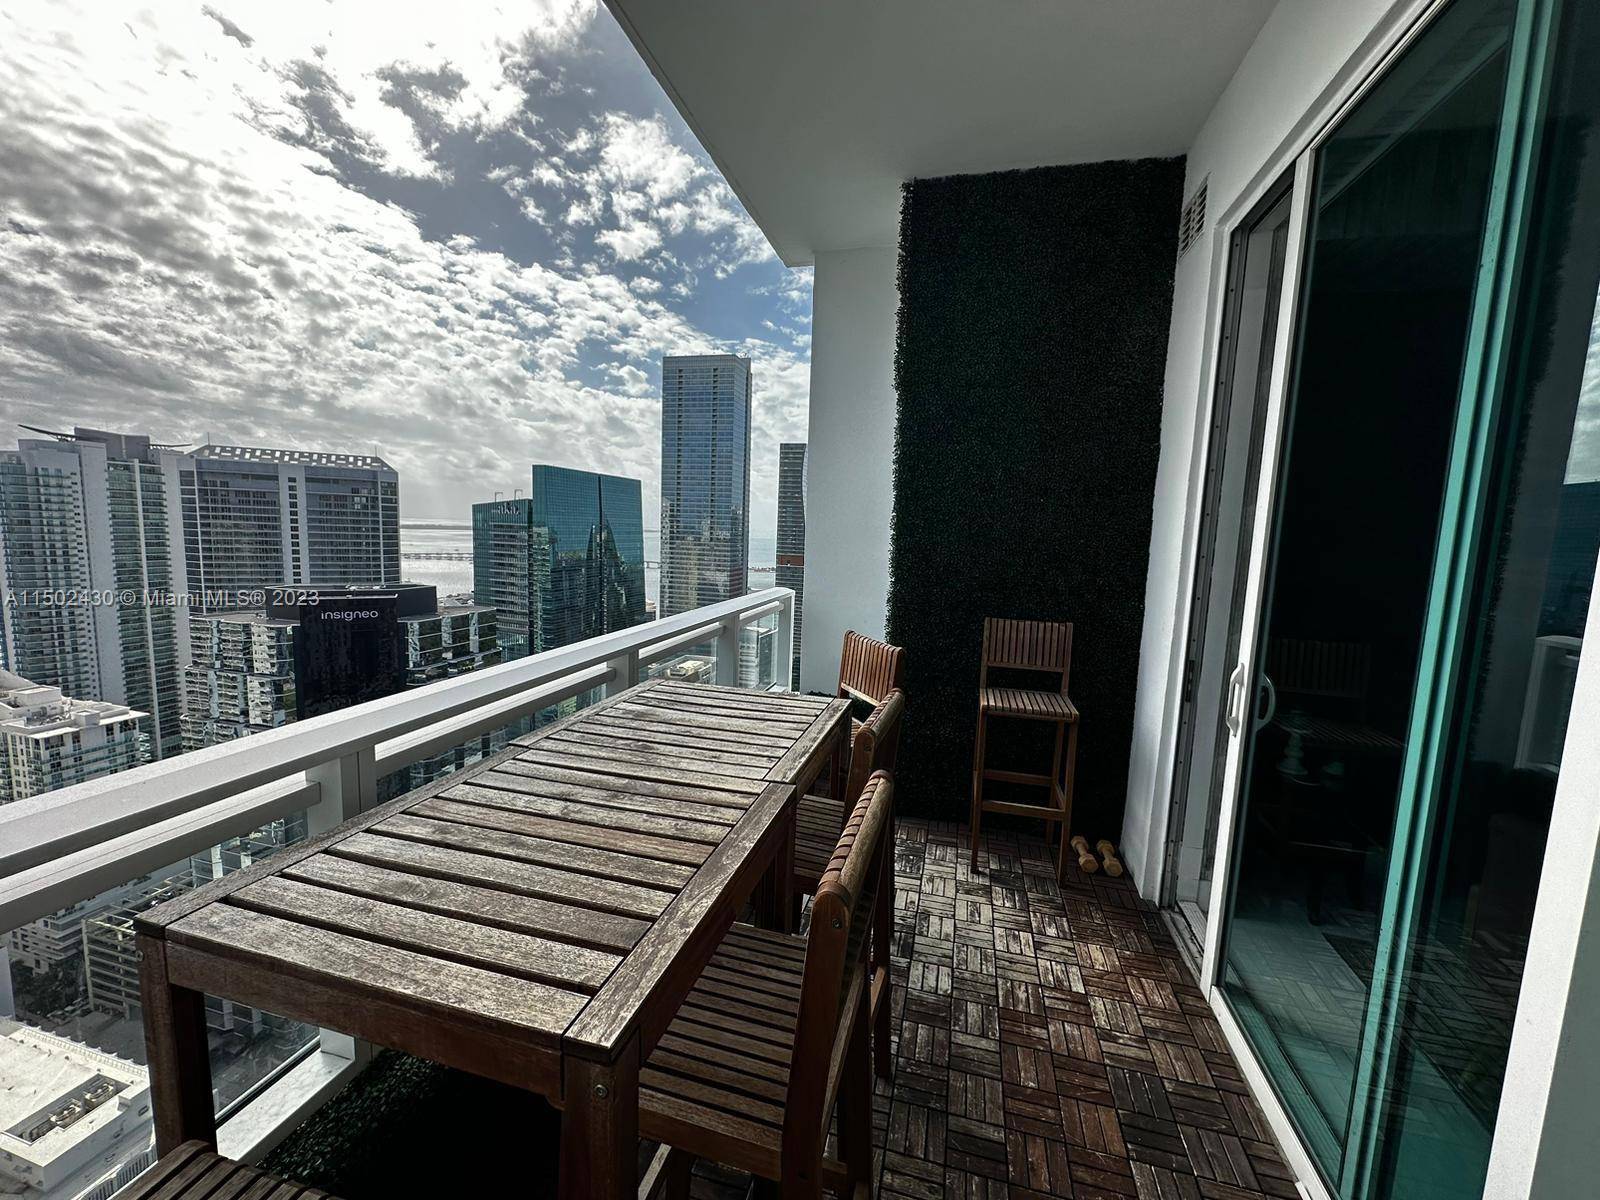 Unique opportunity ! 1 Bed 1 Ba Lower Penthouse with double height ceiling at THE BOND in the heart of Brickell.